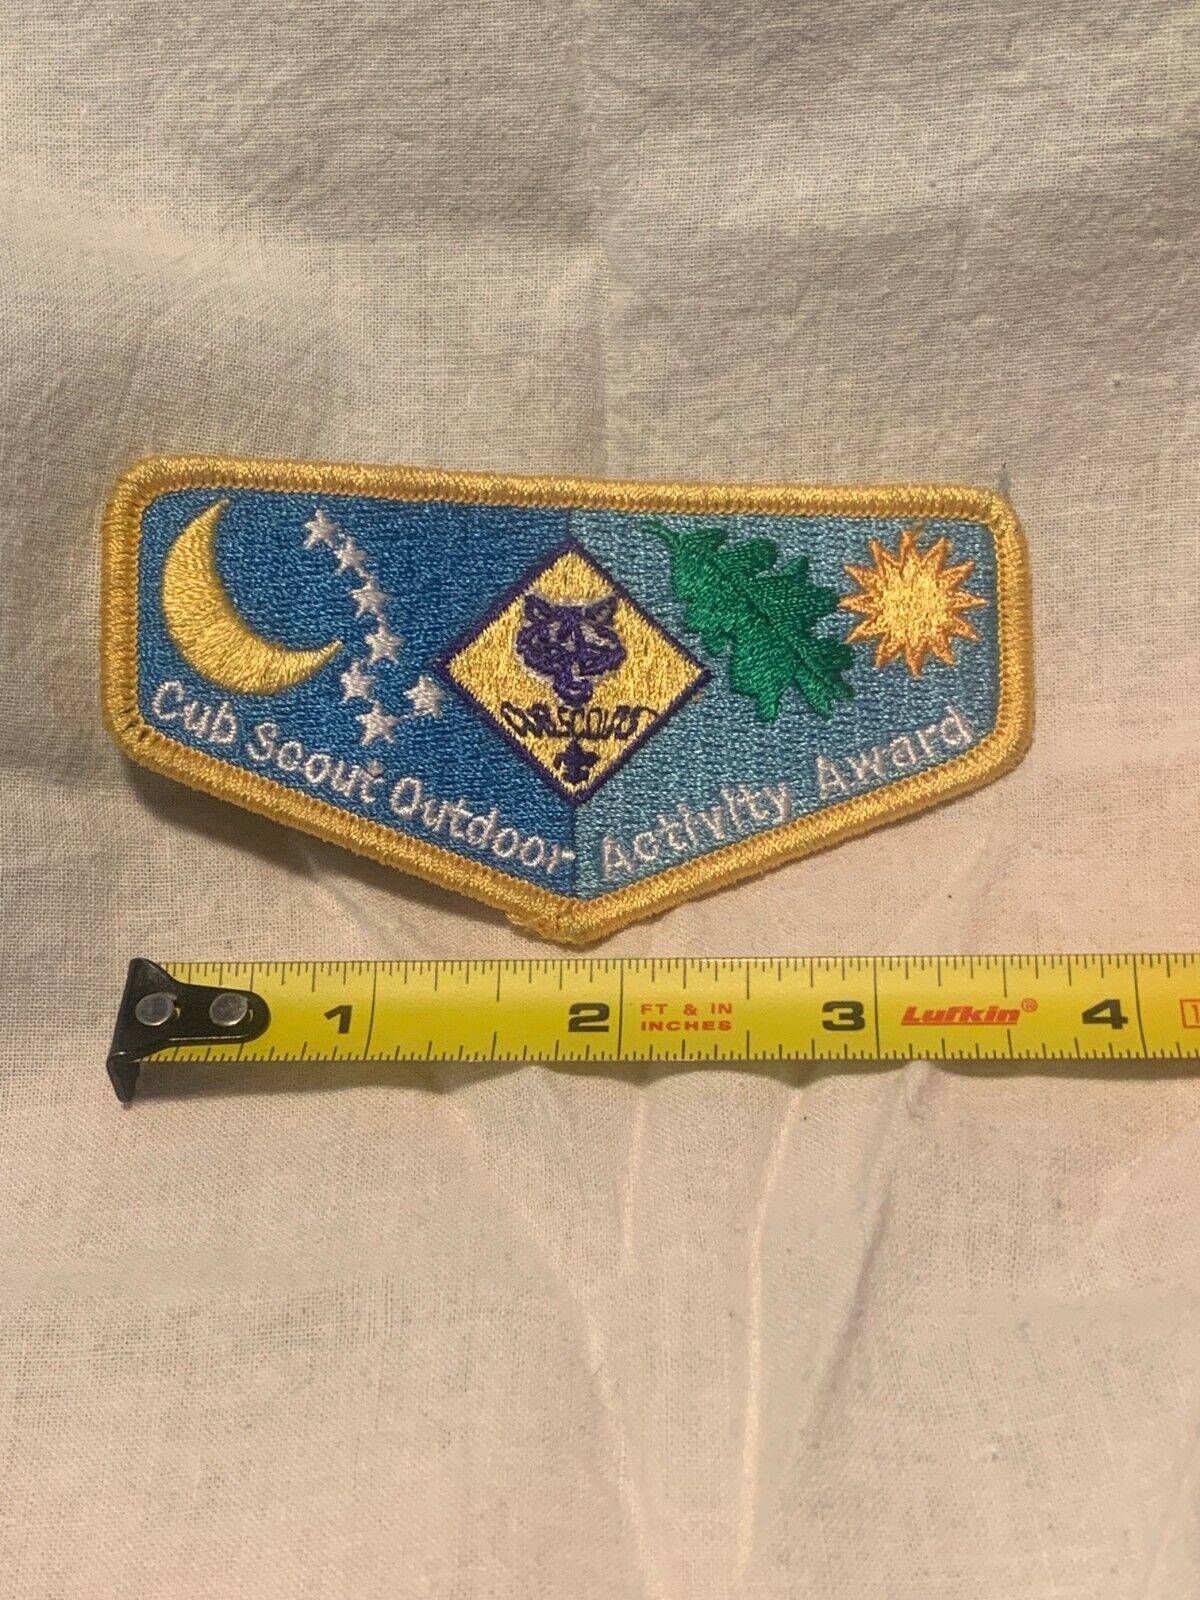 (NEW) Cub Scout Outdoor Activity Award Irom On Patch